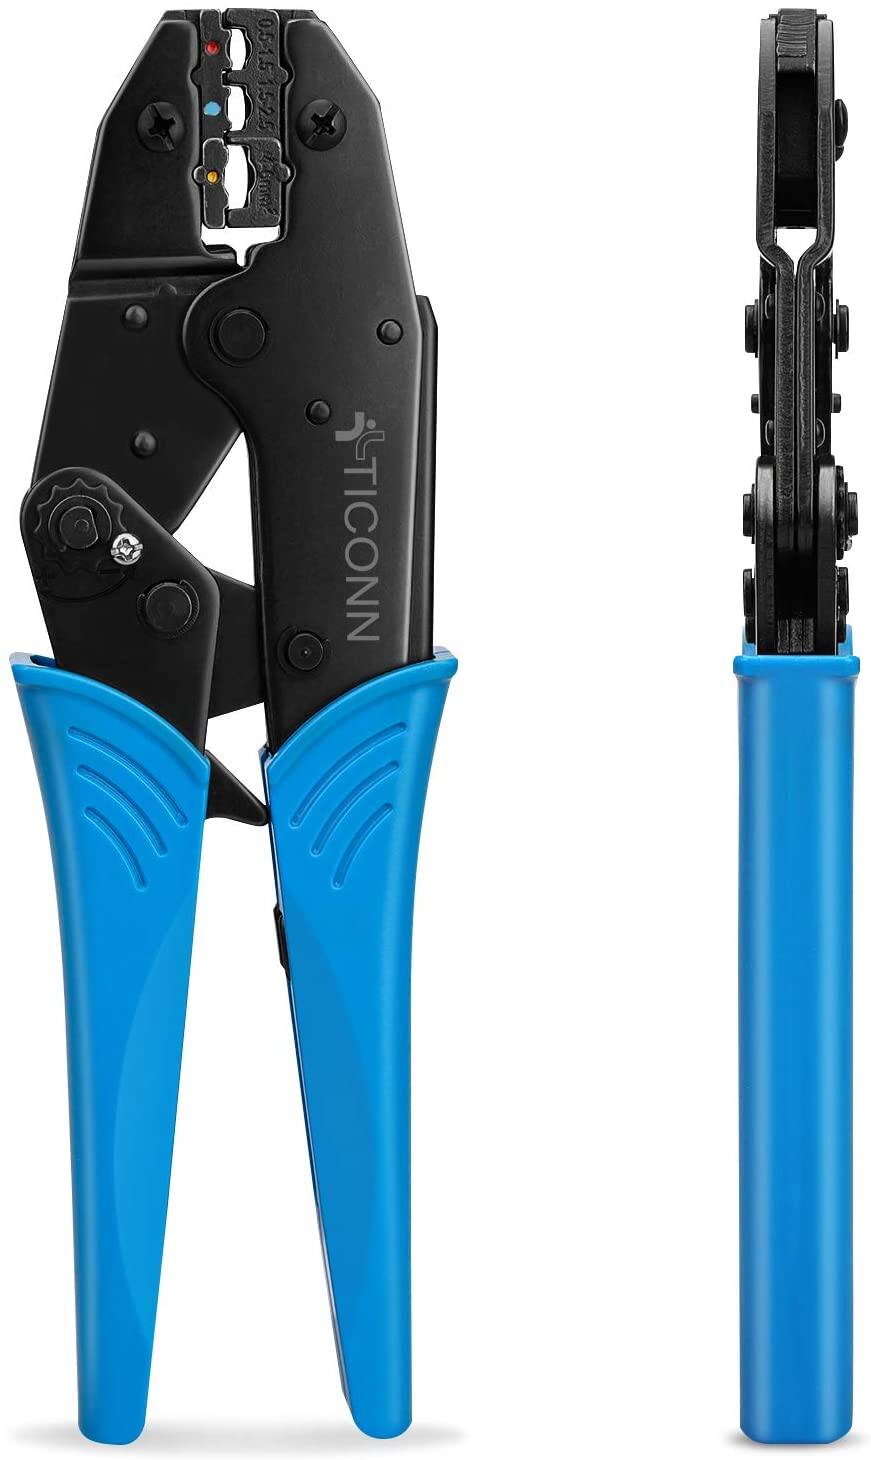 Crimping Tool for Heat Shrink Connectors (3 colors) $12.97 + Free Shipping w/ Prime or $25+